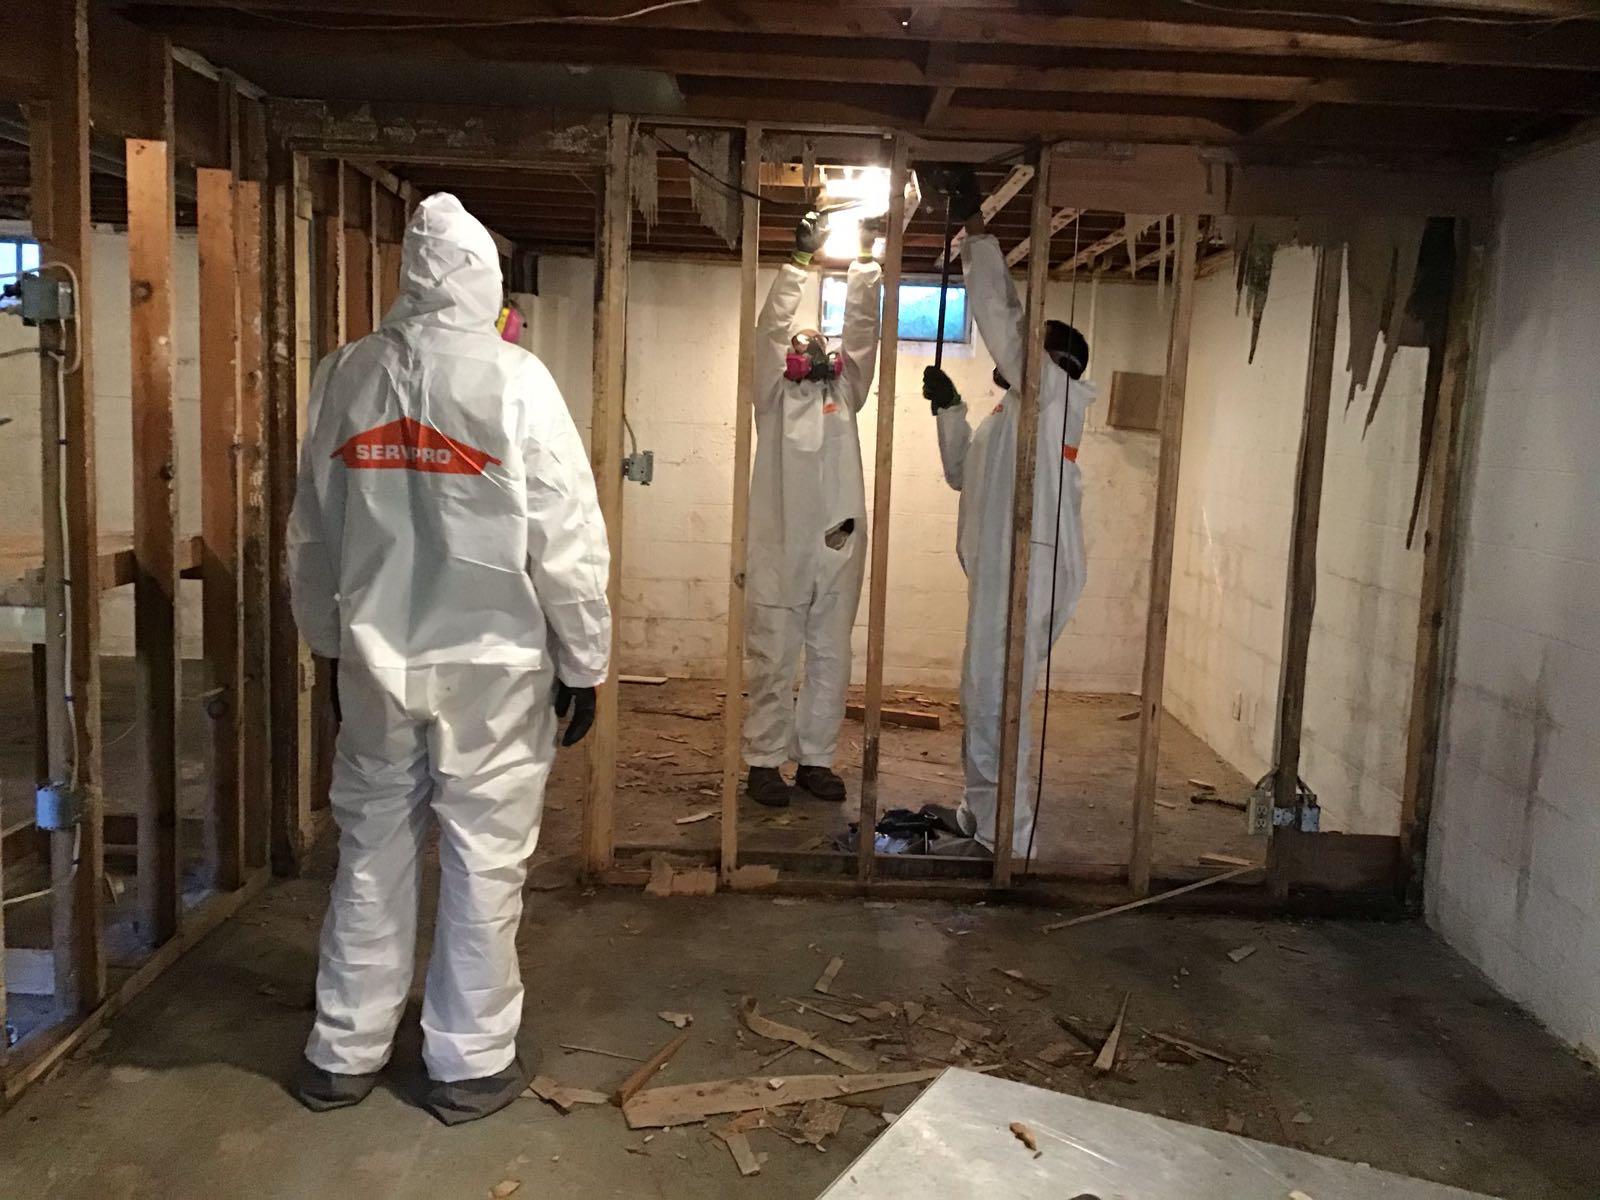 SERVPRO crews wearing Tyvek PPE to perform mold remediation at a home in Akron, Ohio.